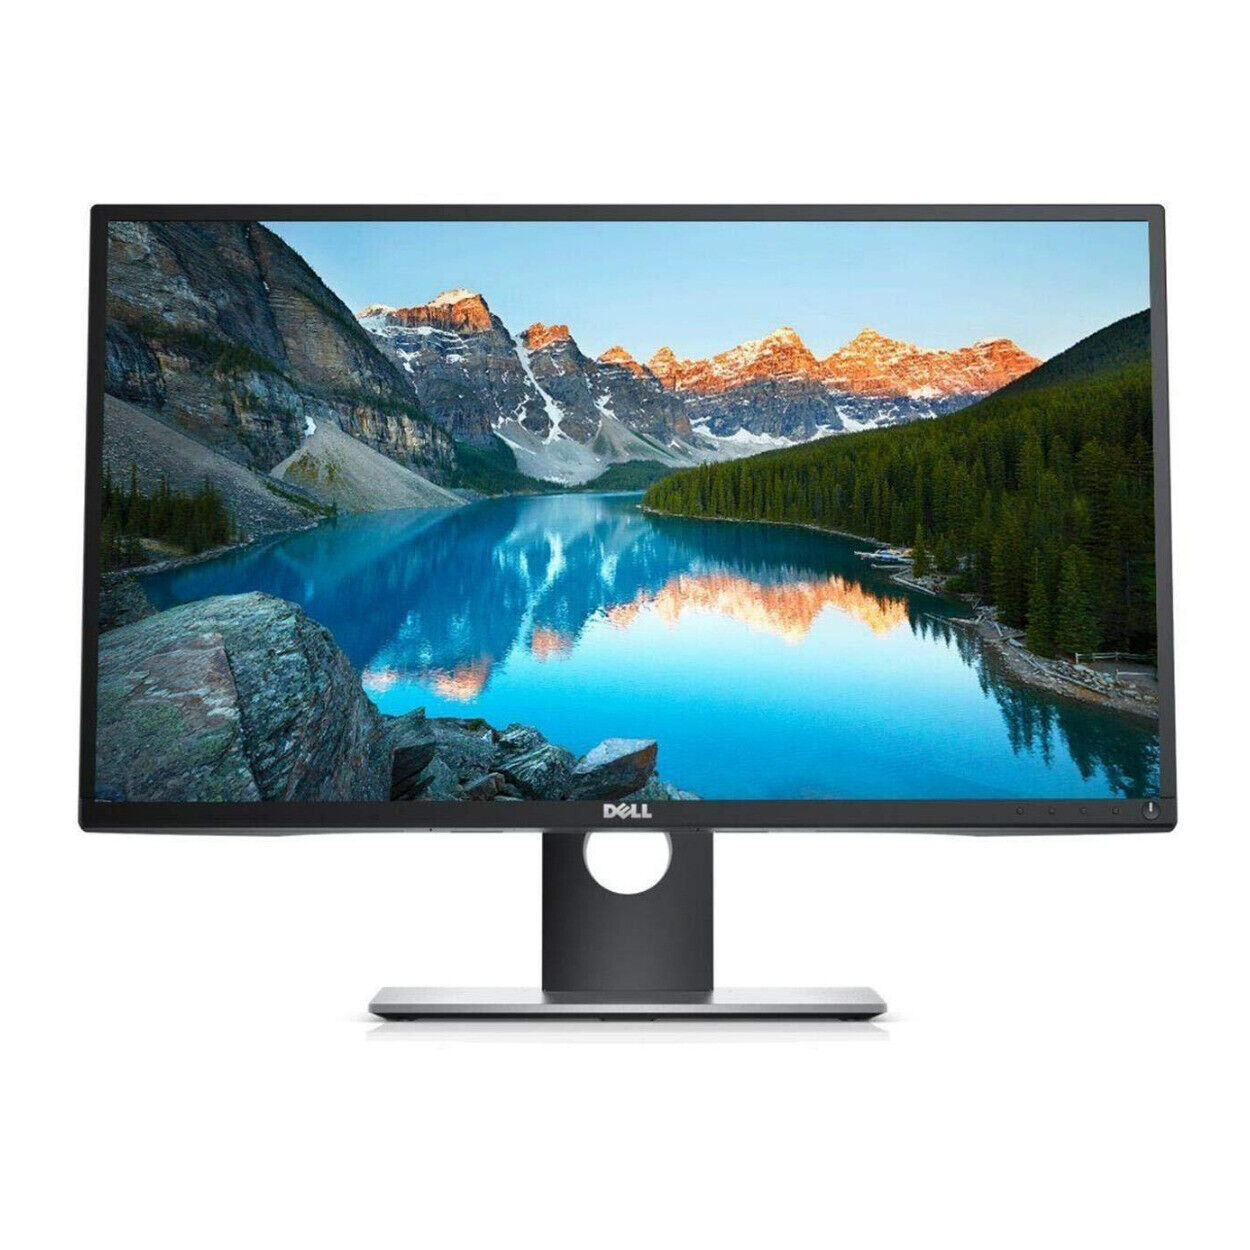 Dell P2417H 23.8 In Full HD 1920 x 1080 IPS Monitor with HDMI DP and USB Renewed